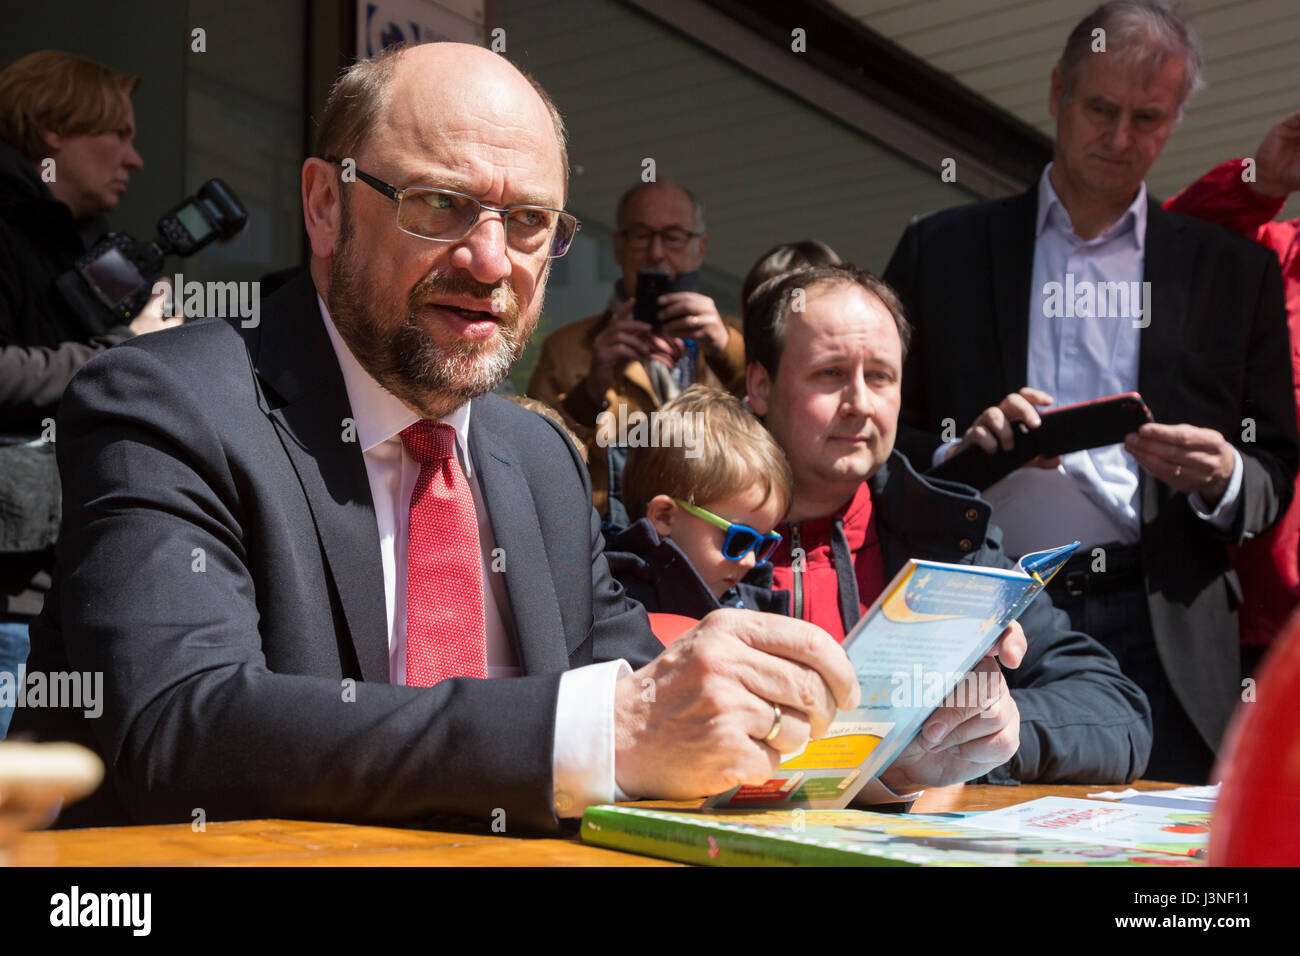 Mülheim-Ruhr, Germany. 6 May 2017. Martin Schulz, SPD candidate for the German Chancellorship, election campaigning for the Landtag parliament of North Rhine-Westphalia in the town cenre of Mulheim an der Ruhr. Photo: Vibrant Pictures/Alamy Live News Stock Photo